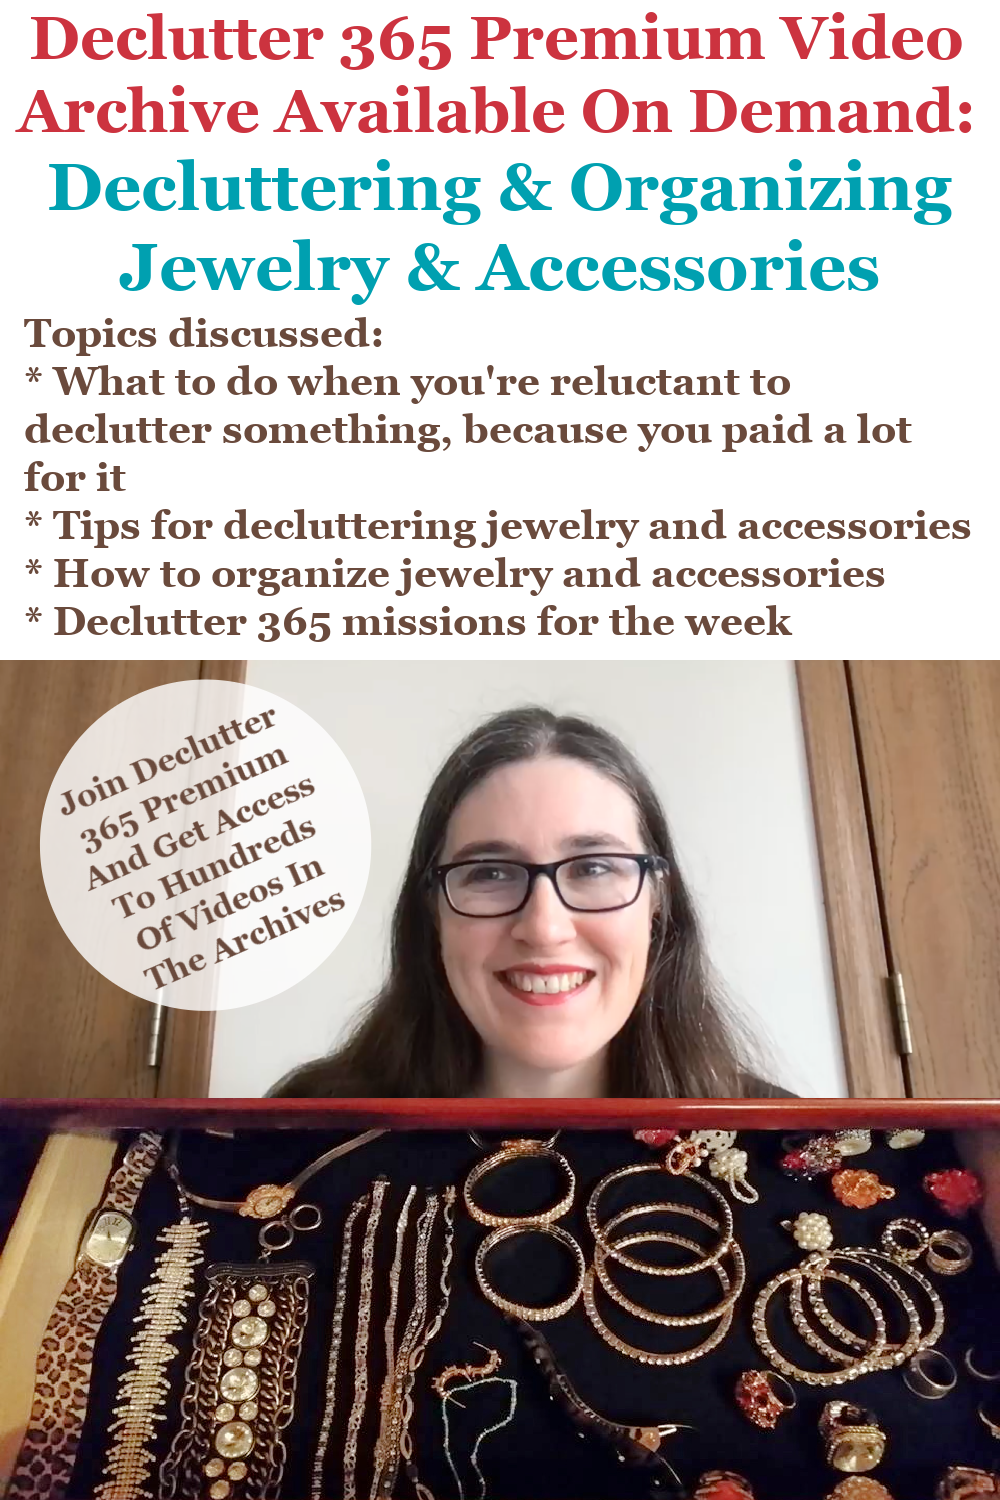 Declutter 365 Premium video archive available on demand all about decluttering and organizing jewelry and accessories, on Home Storage Solutions 101